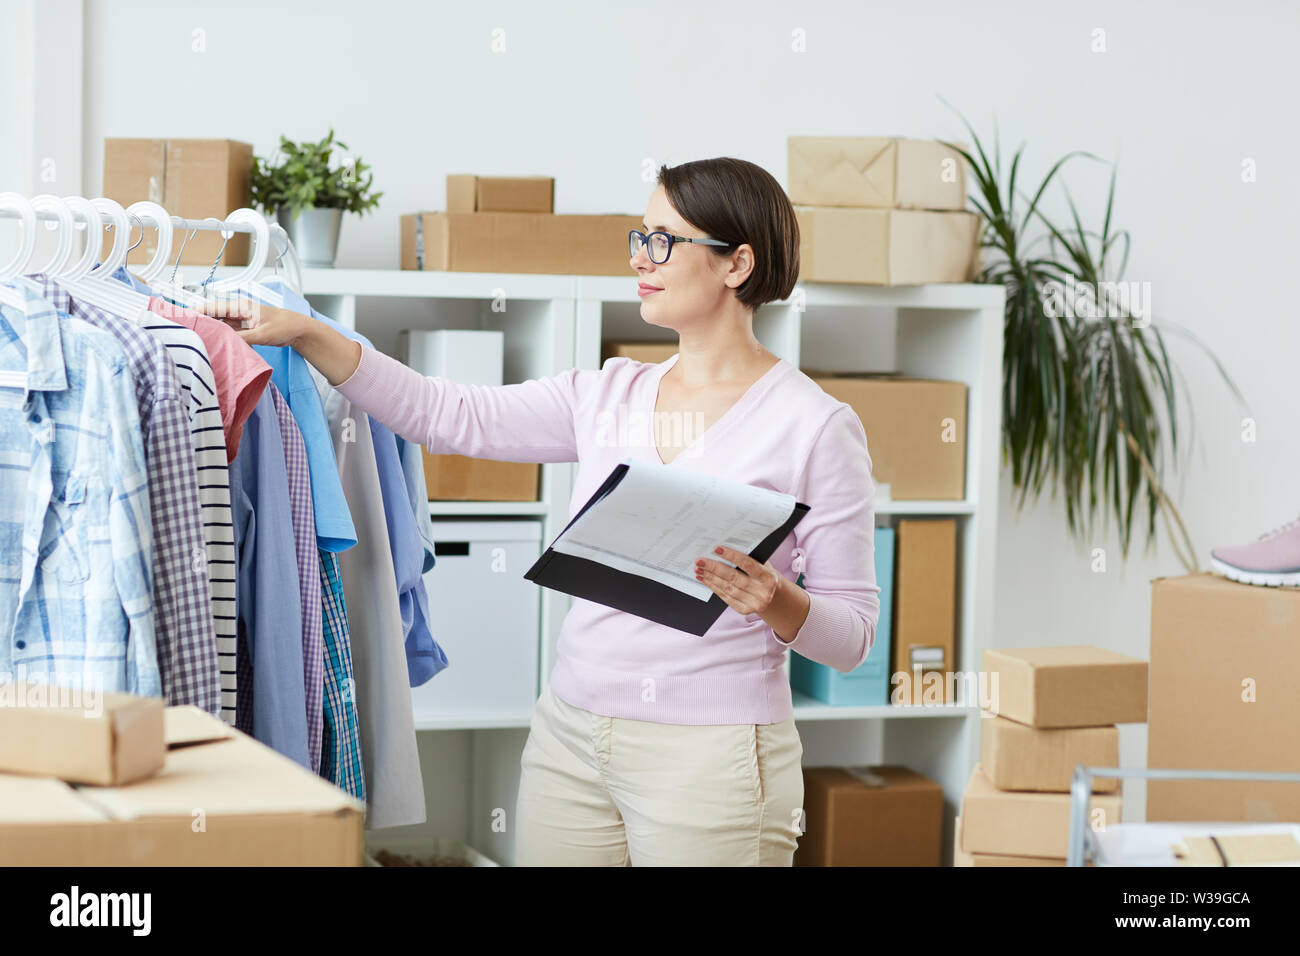 Young woman with document standing by rack and looking through new collection of casualwear Stock Photo